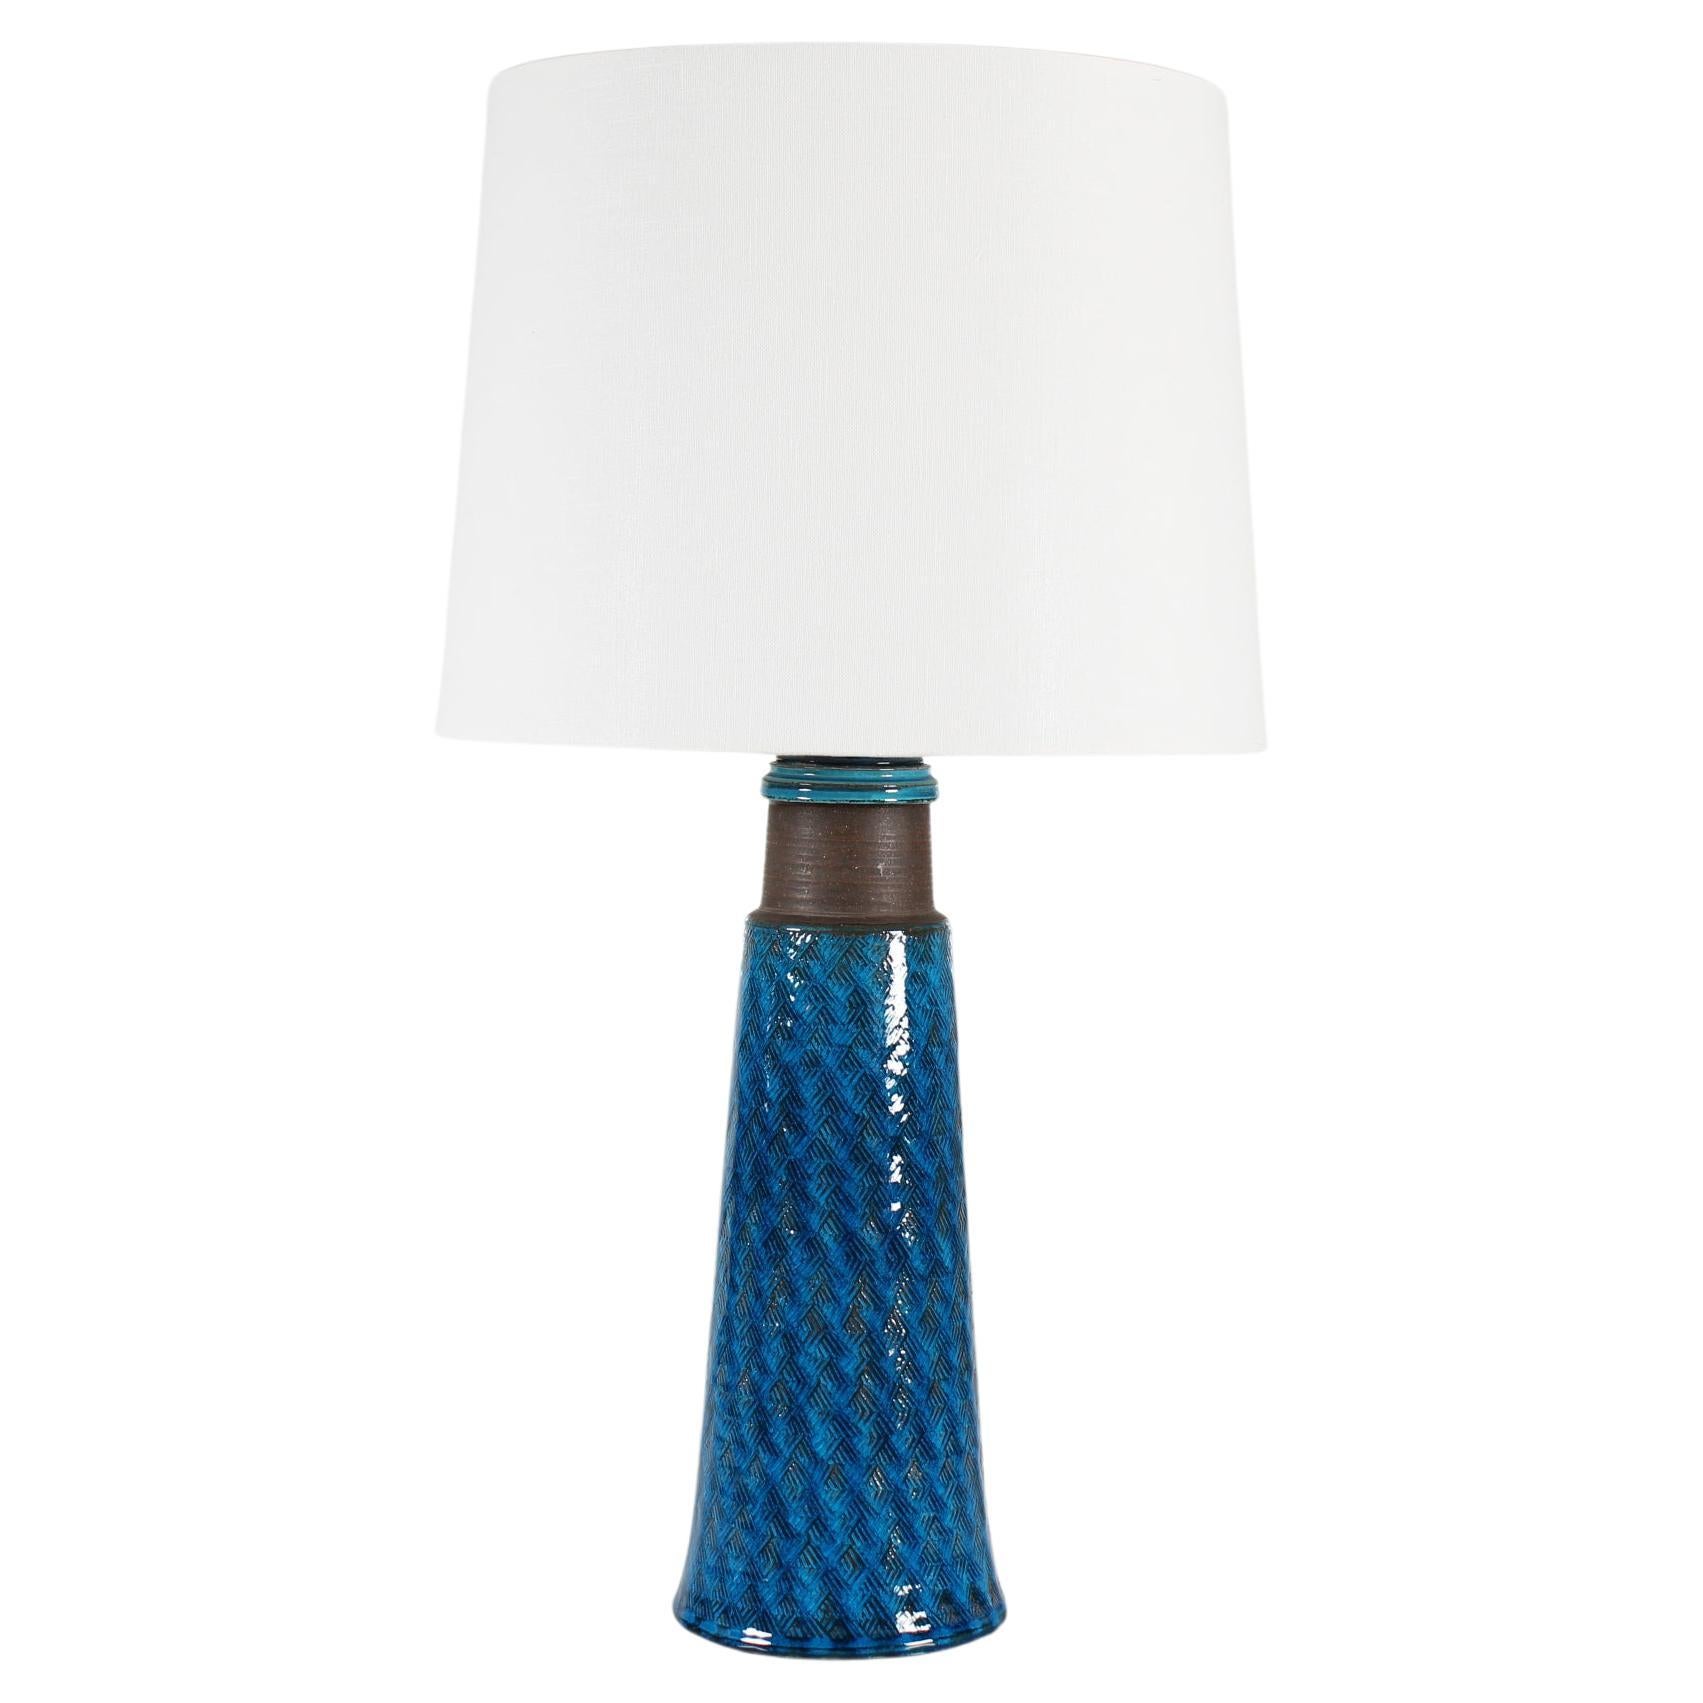 Herman A Kähler Tall In 27 Tablelamp Turquoise Glaze Made in Denmark Mid-Century For Sale